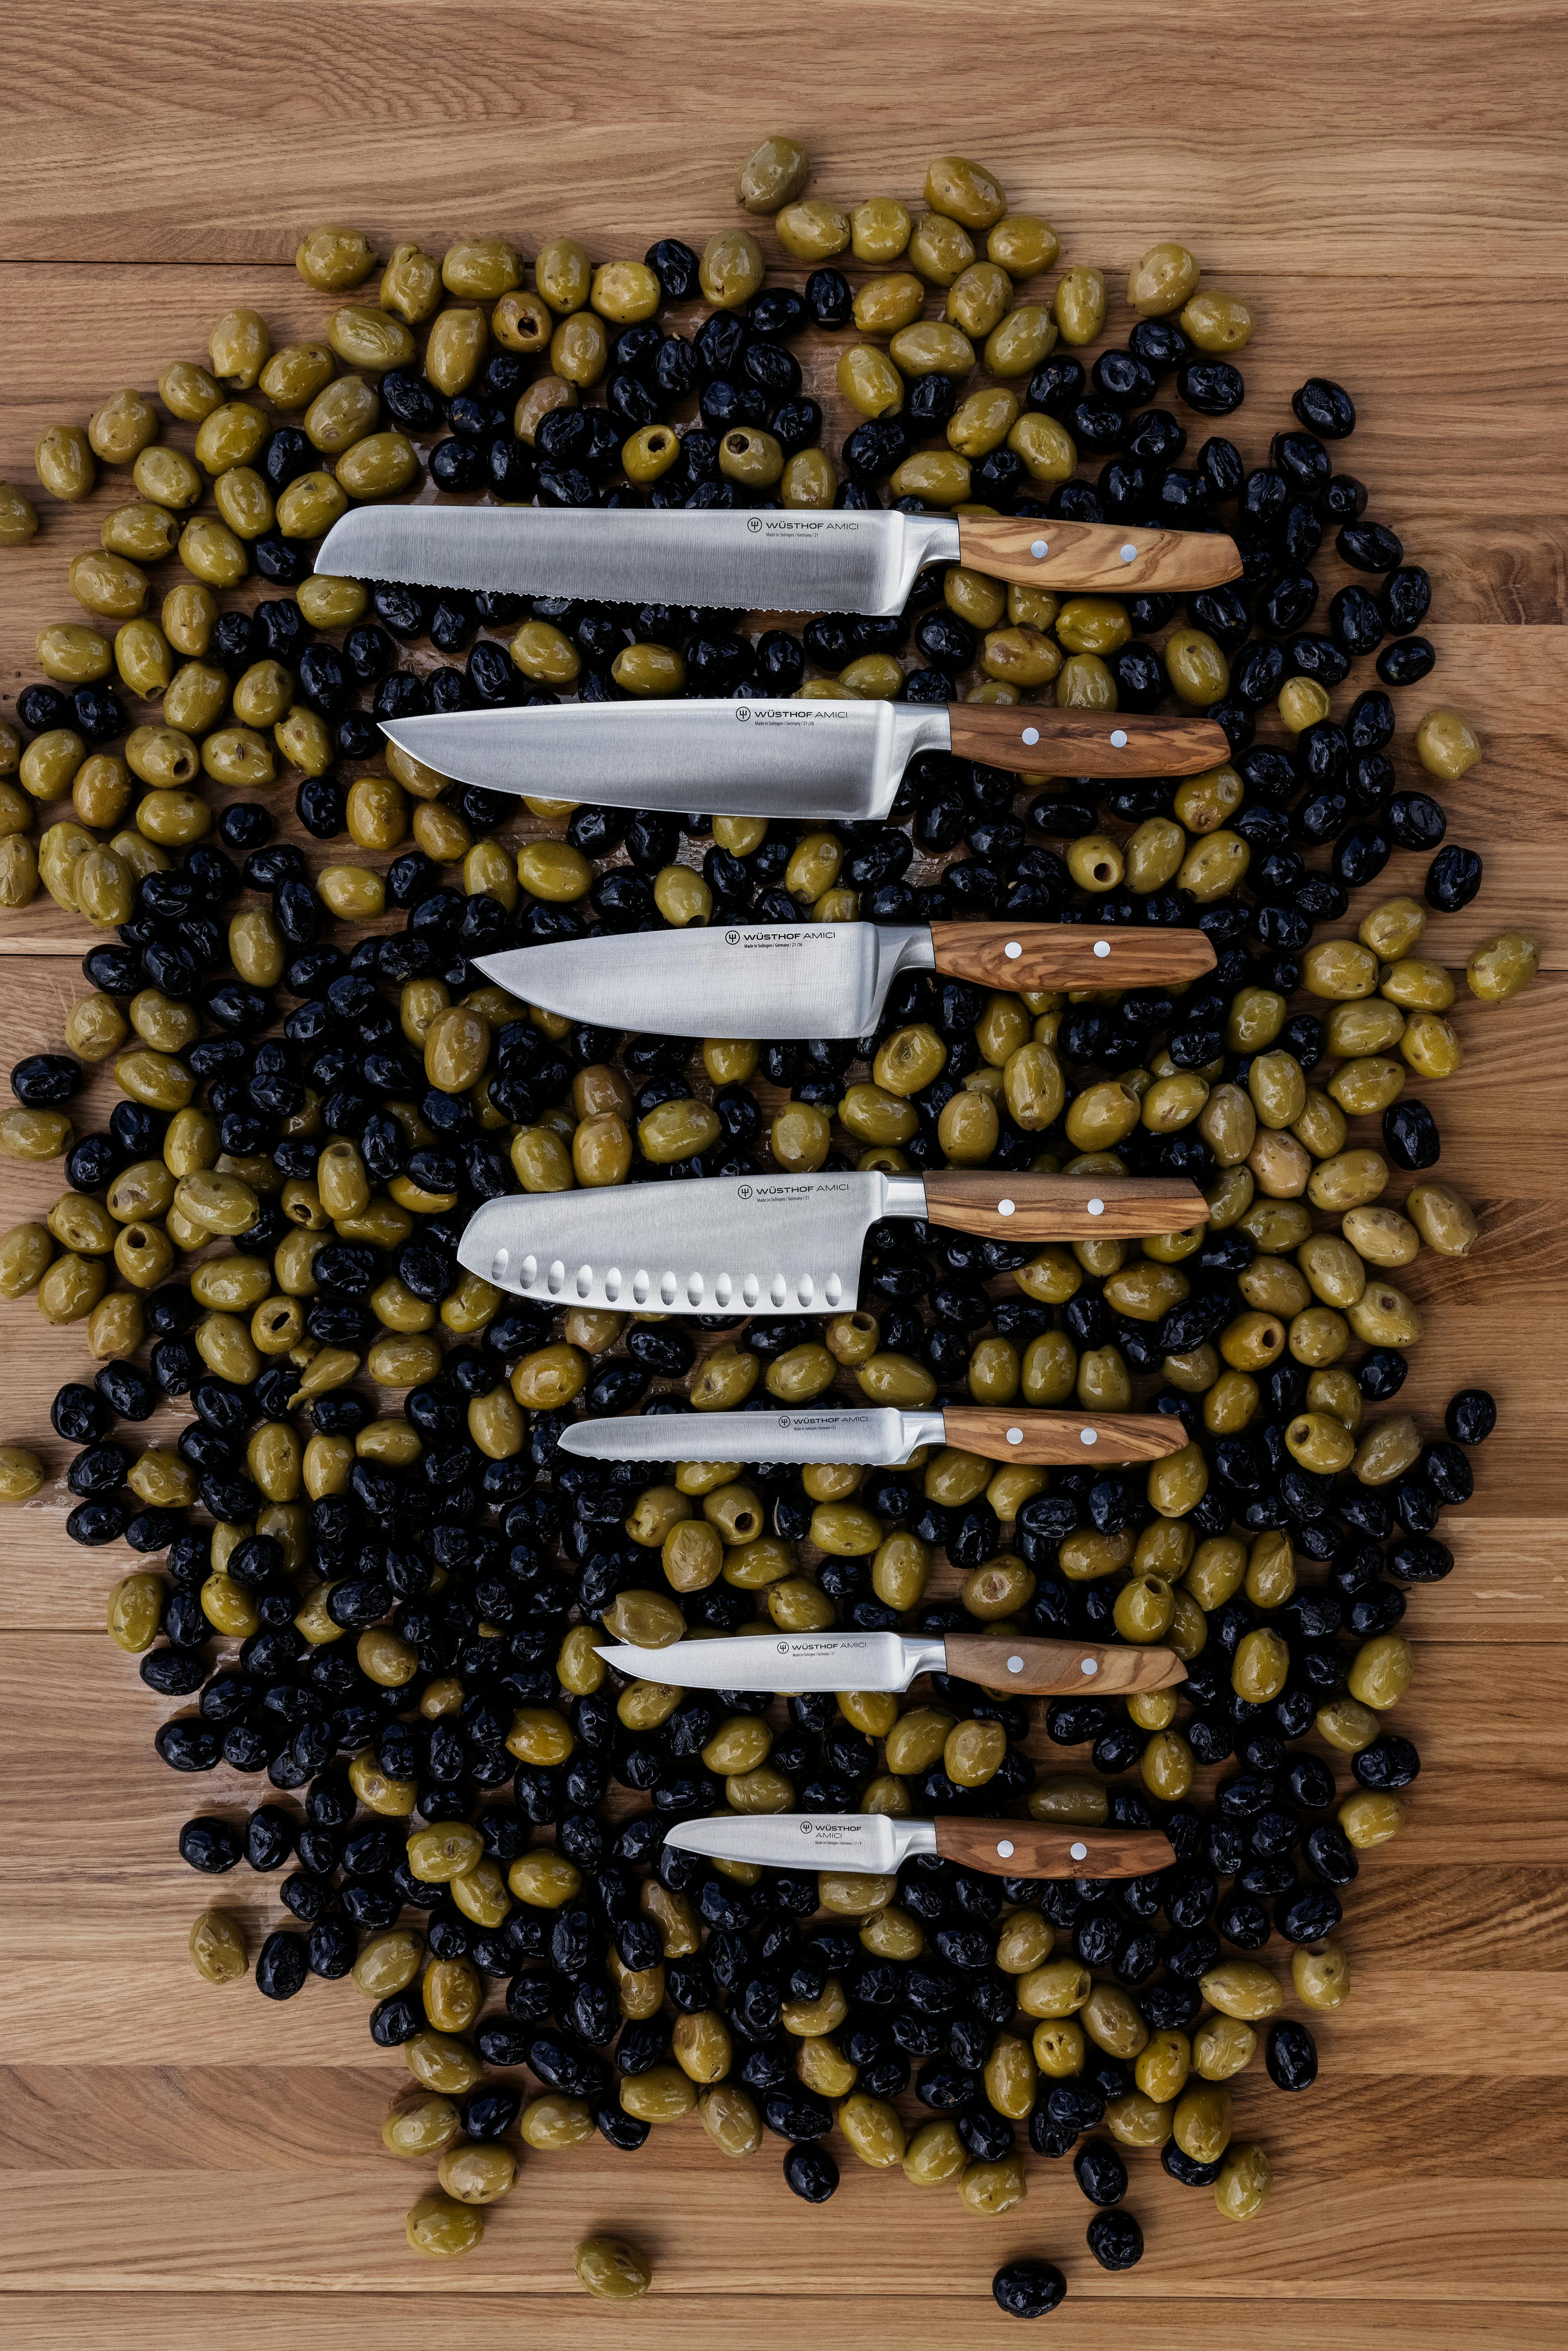 Amici knife lineup on olives